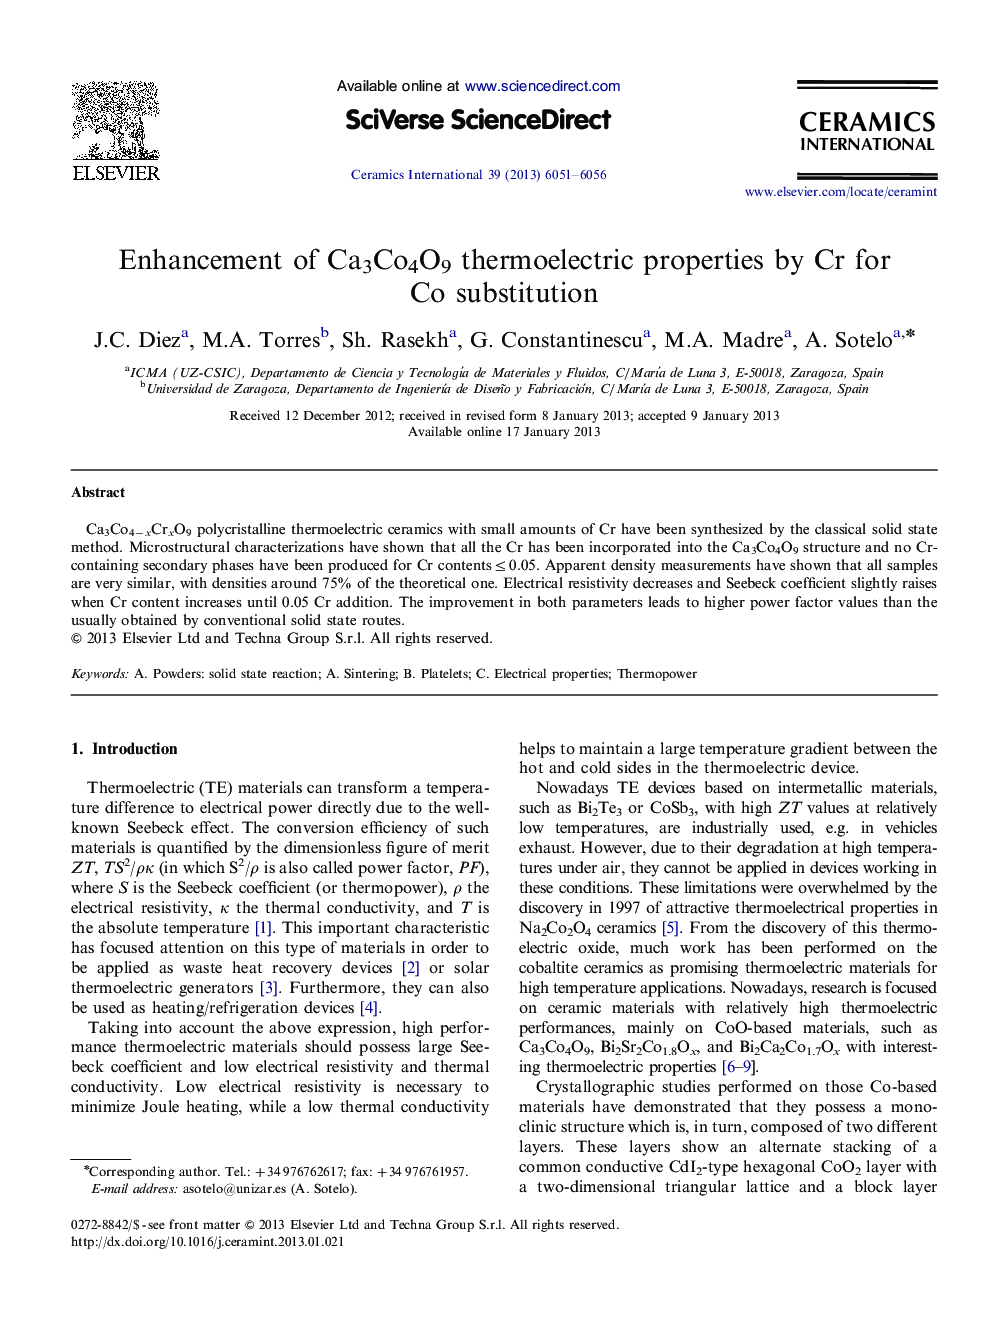 Enhancement of Ca3Co4O9 thermoelectric properties by Cr for Co substitution